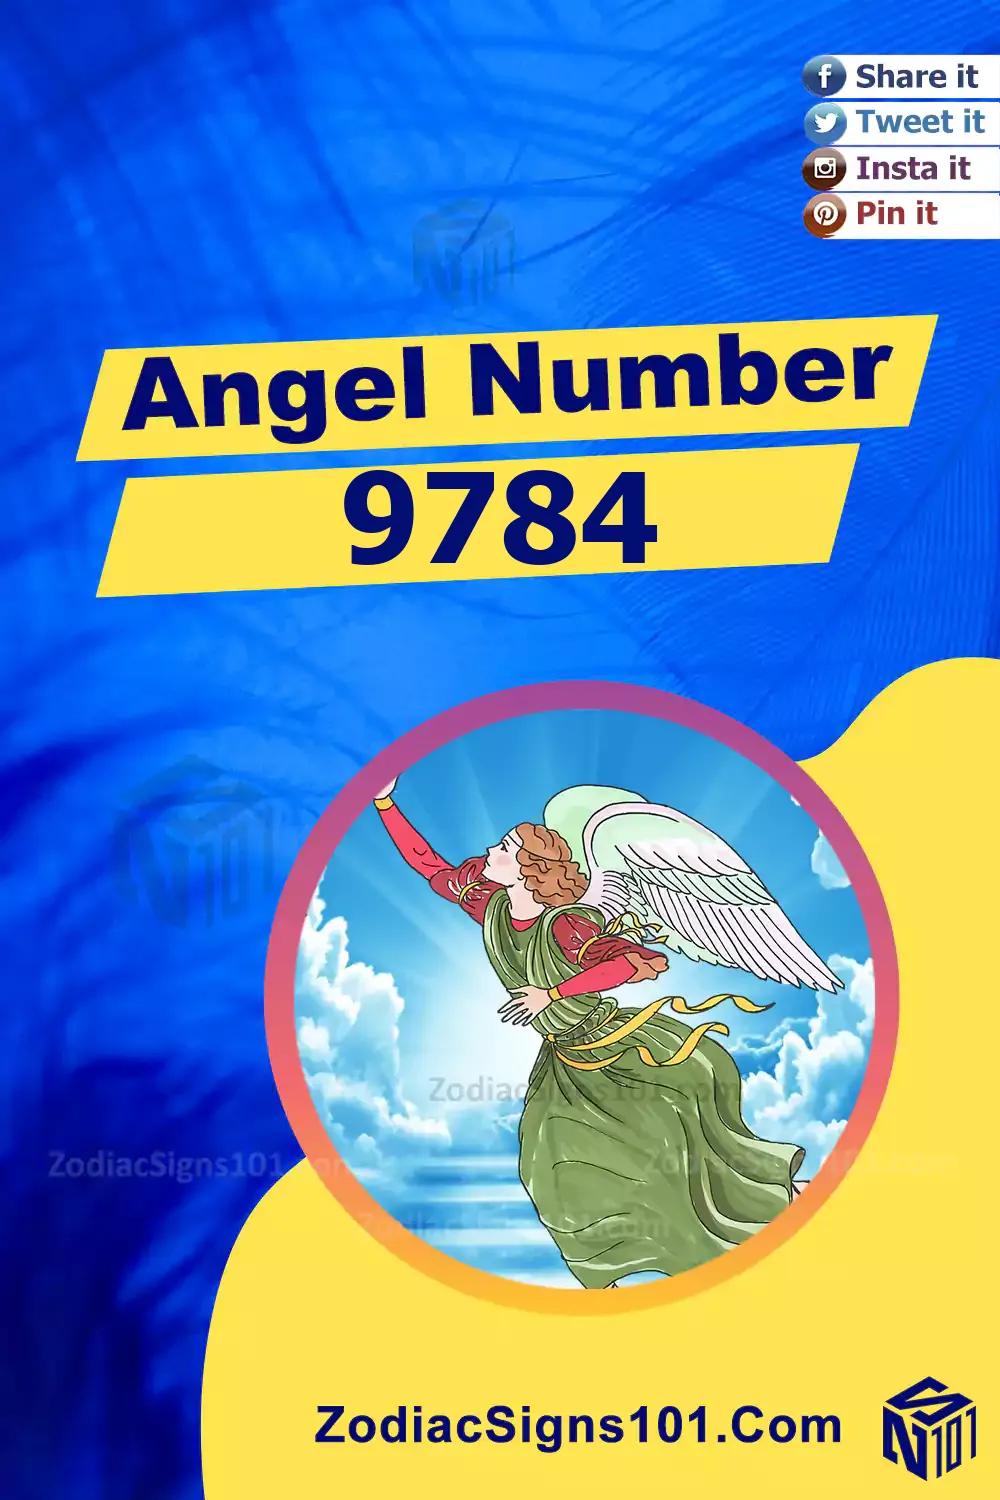 9784 Angel Number Meaning